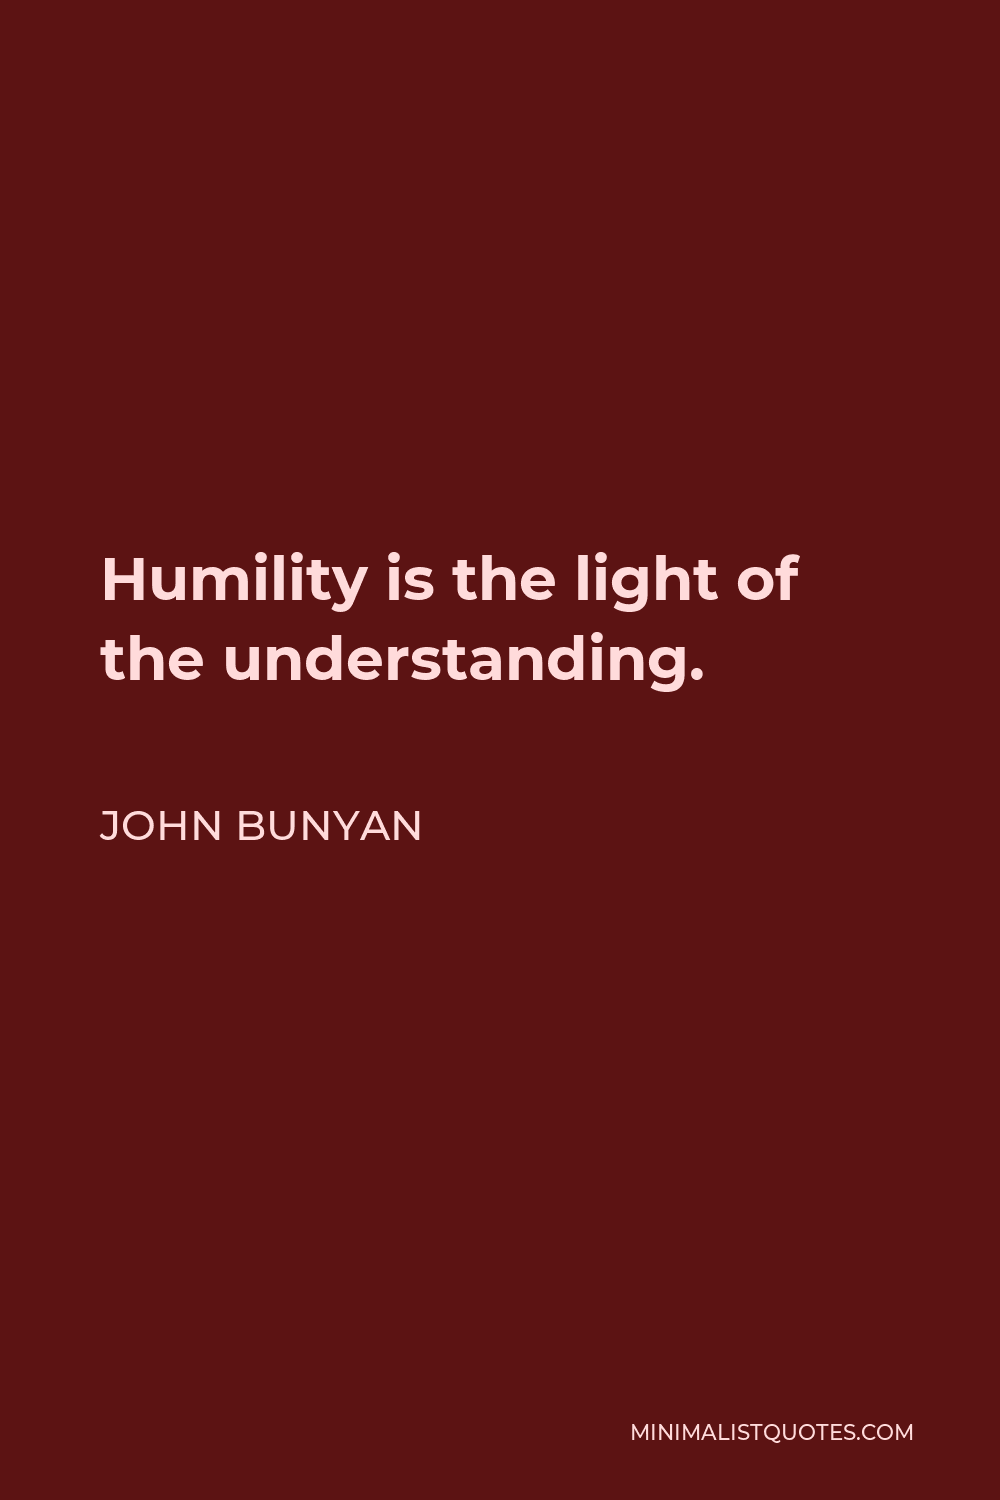 John Bunyan Quote - Humility is the light of the understanding.